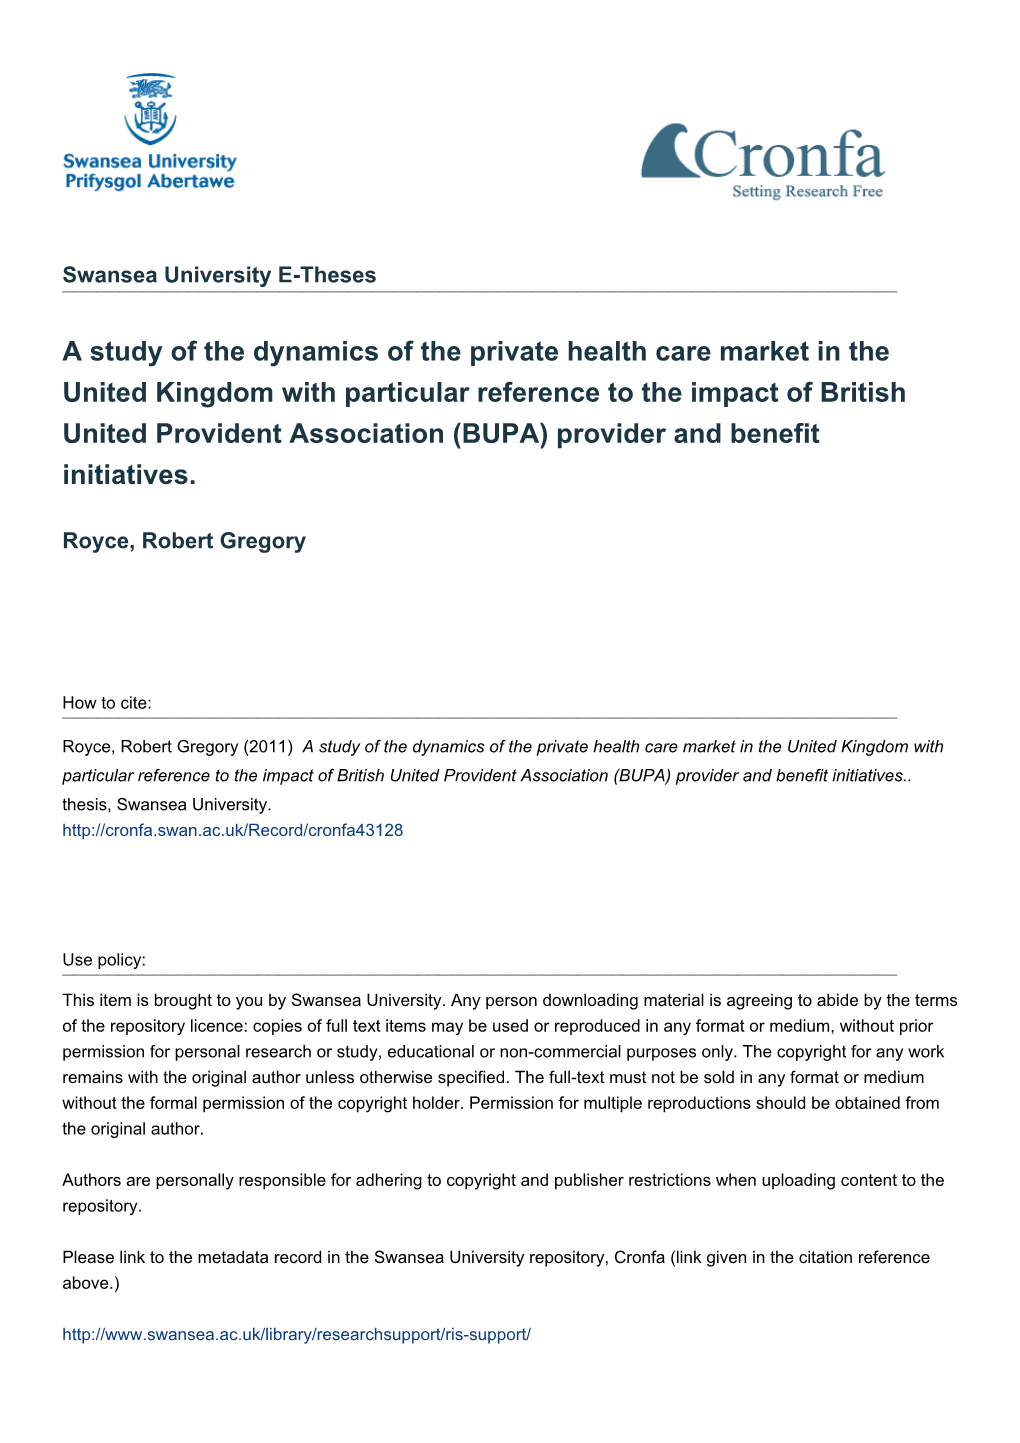 A Study of the Dynamics of the Private Health Care Market in the United